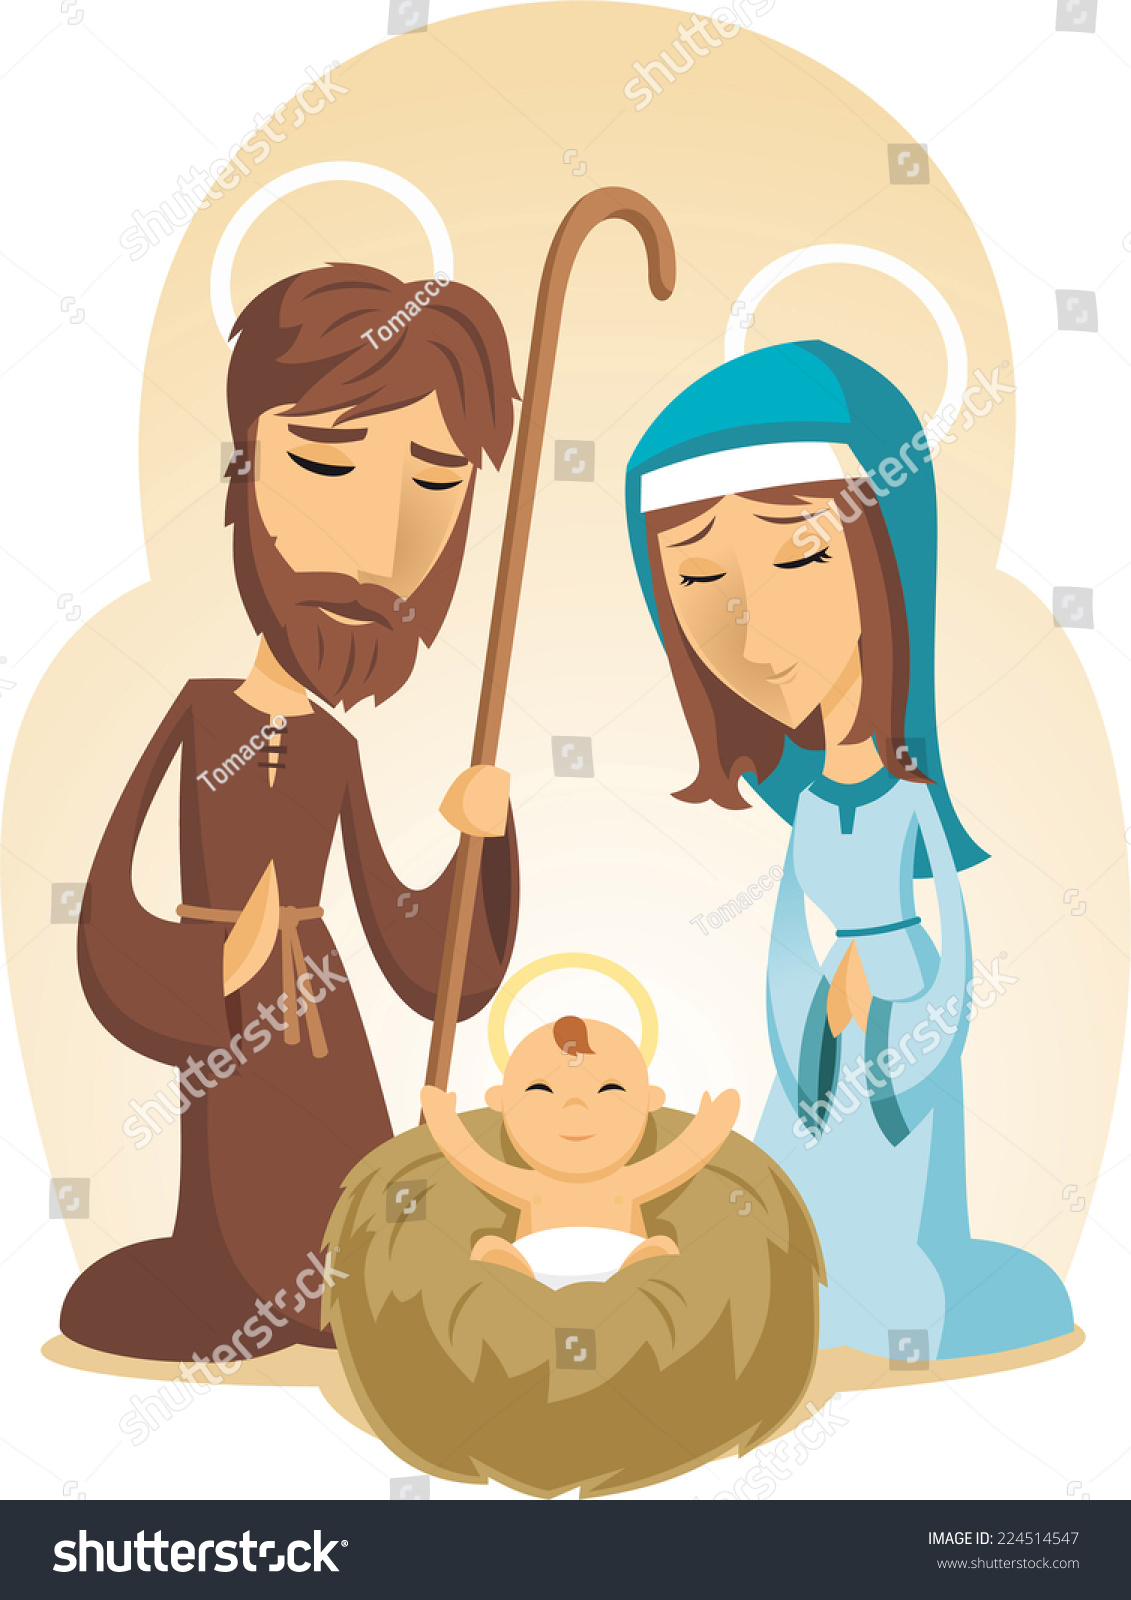 clipart of baby jesus and mary - photo #17